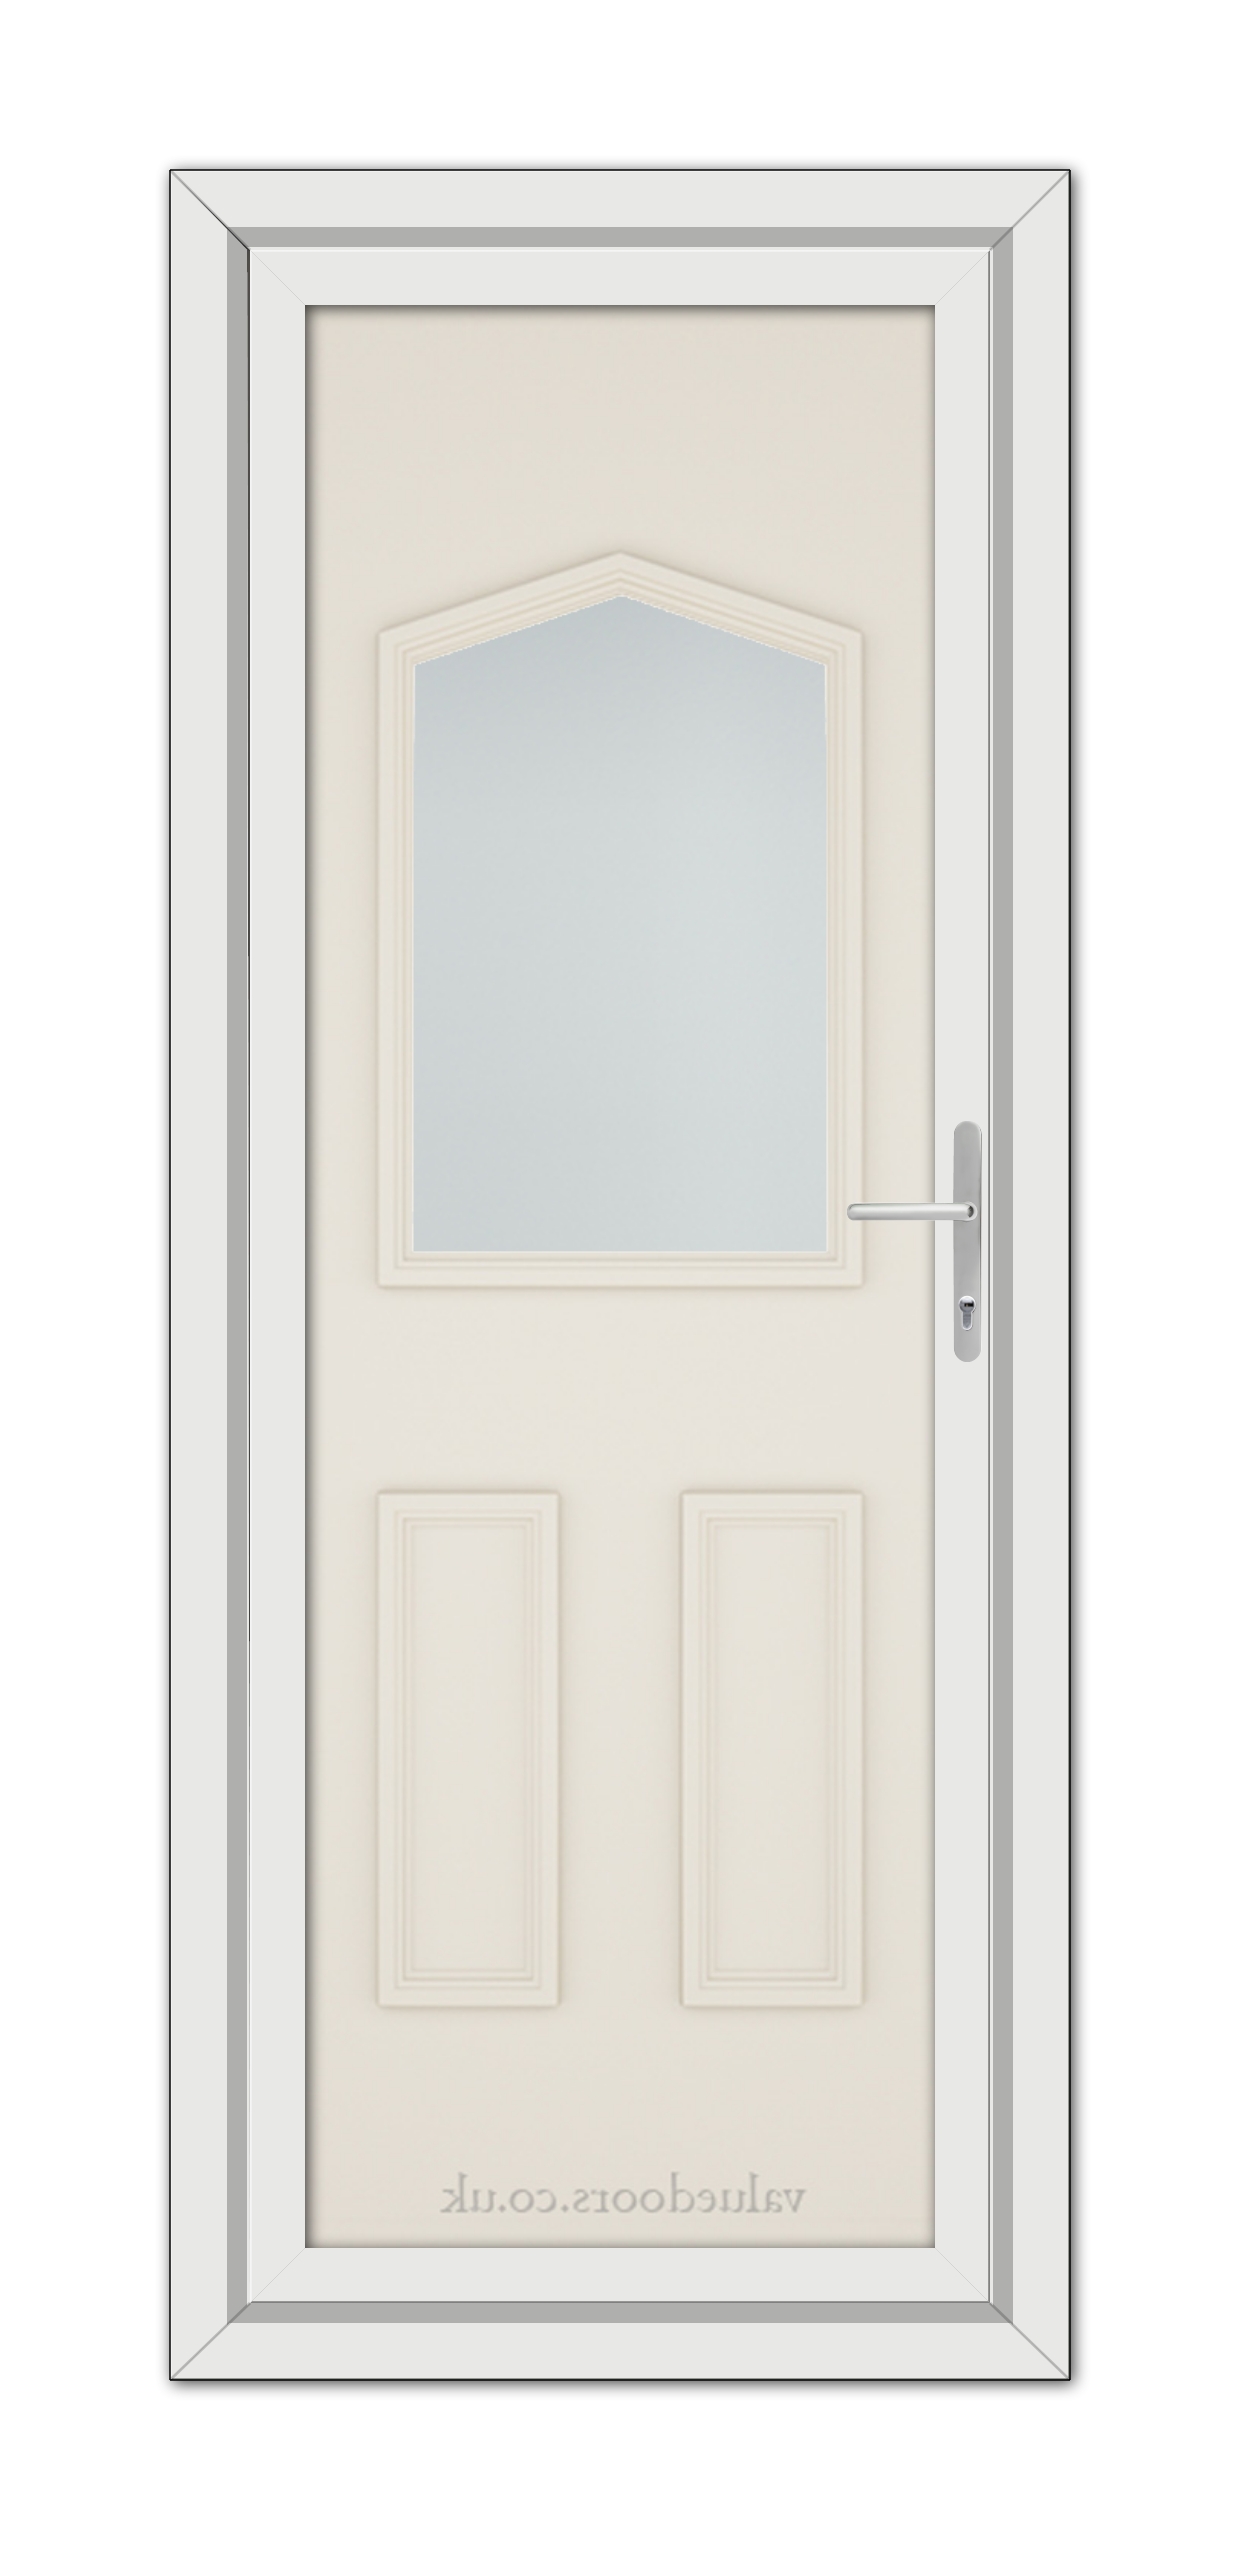 A vertical image of a closed, Cream Oxford uPVC door featuring a rectangular glass window near the top and a modern handle on the right side. The door frame is white.